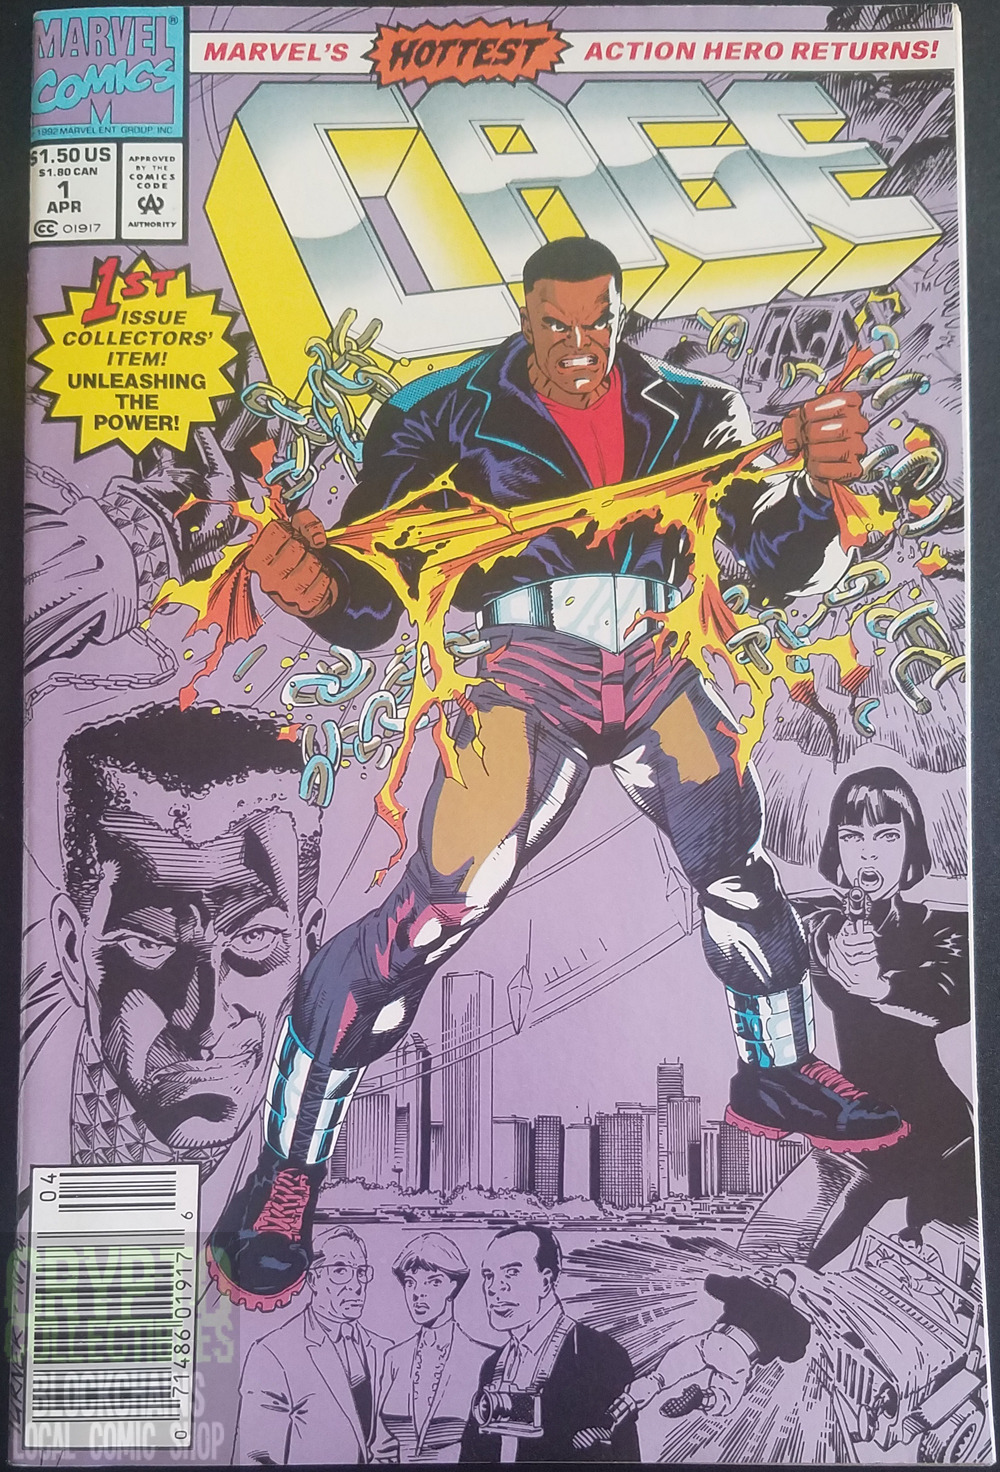 Cage 1 (April 1992) by Marvel Comics Luke Cage is